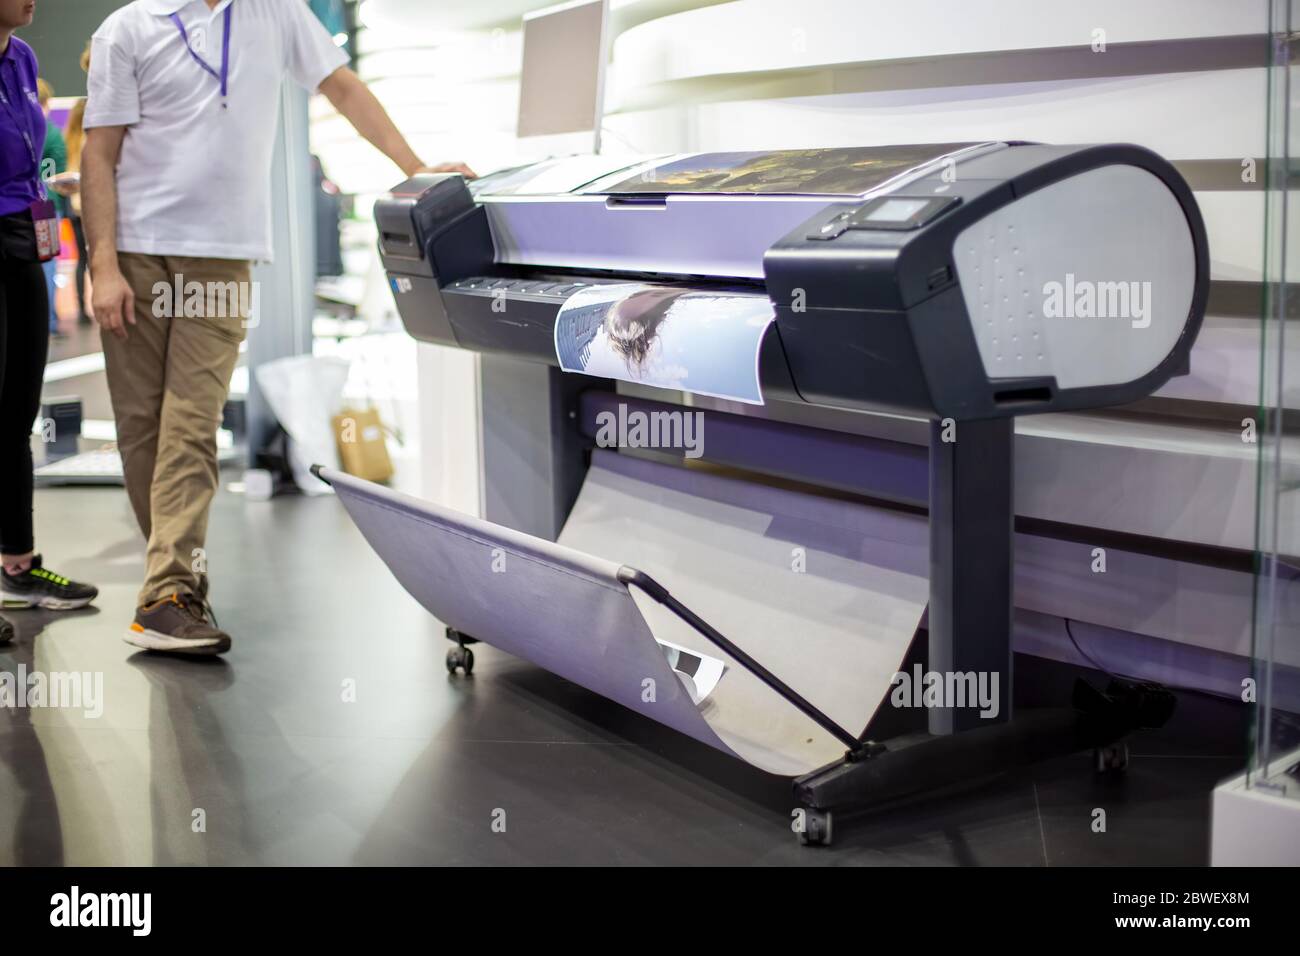 plotter prints a poster. standing next to people in blur. close-up, background in blur Stock Photo